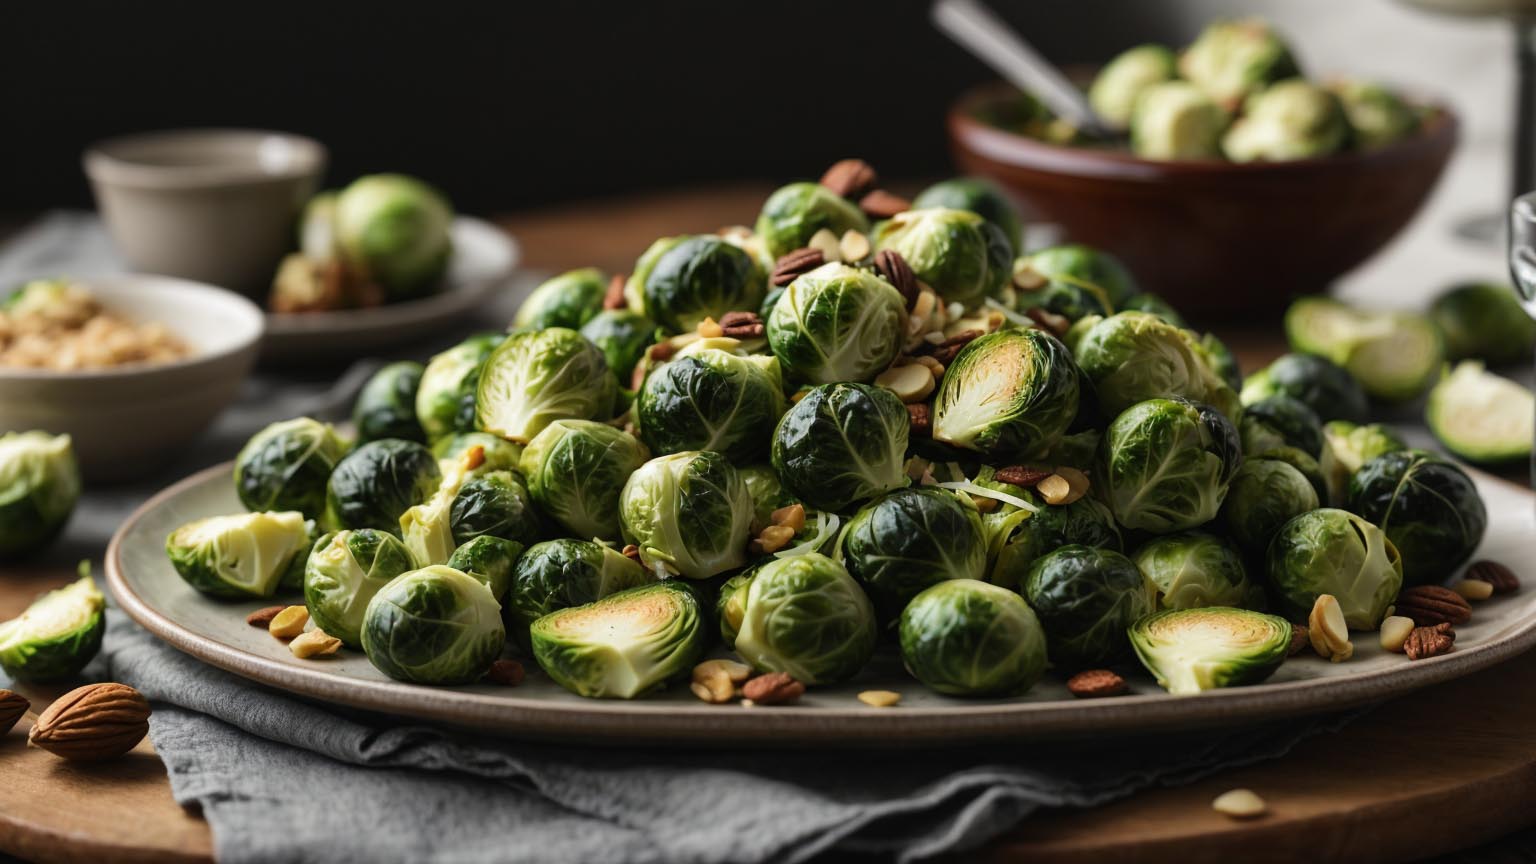 What to Serve With Brussels Sprouts: Dining Delight